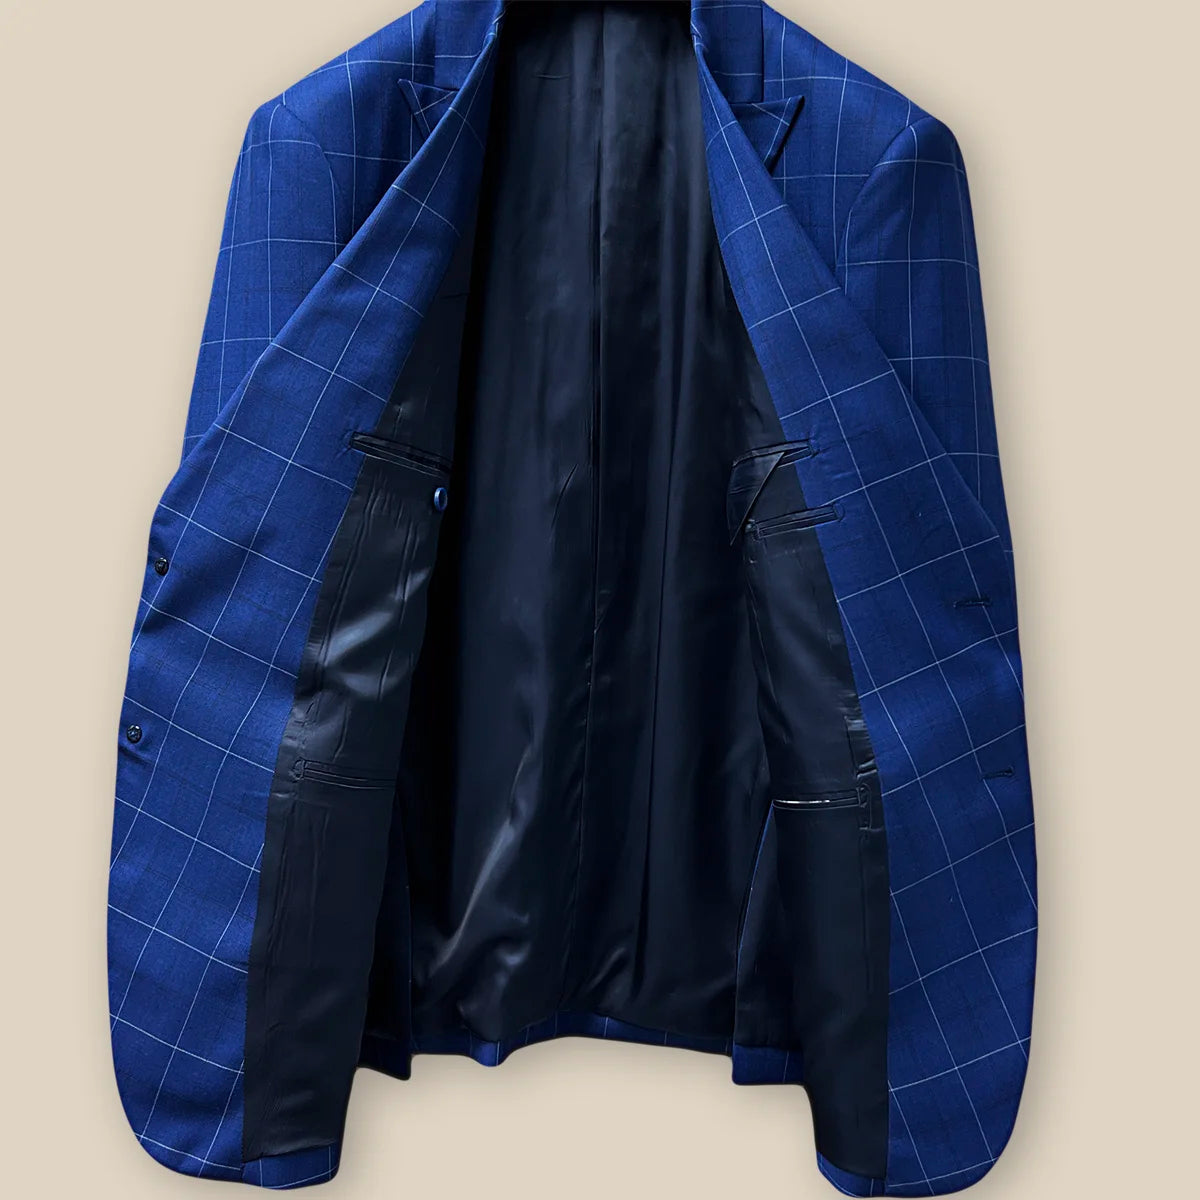 Interior view of a navy blue windowpane suit jacket